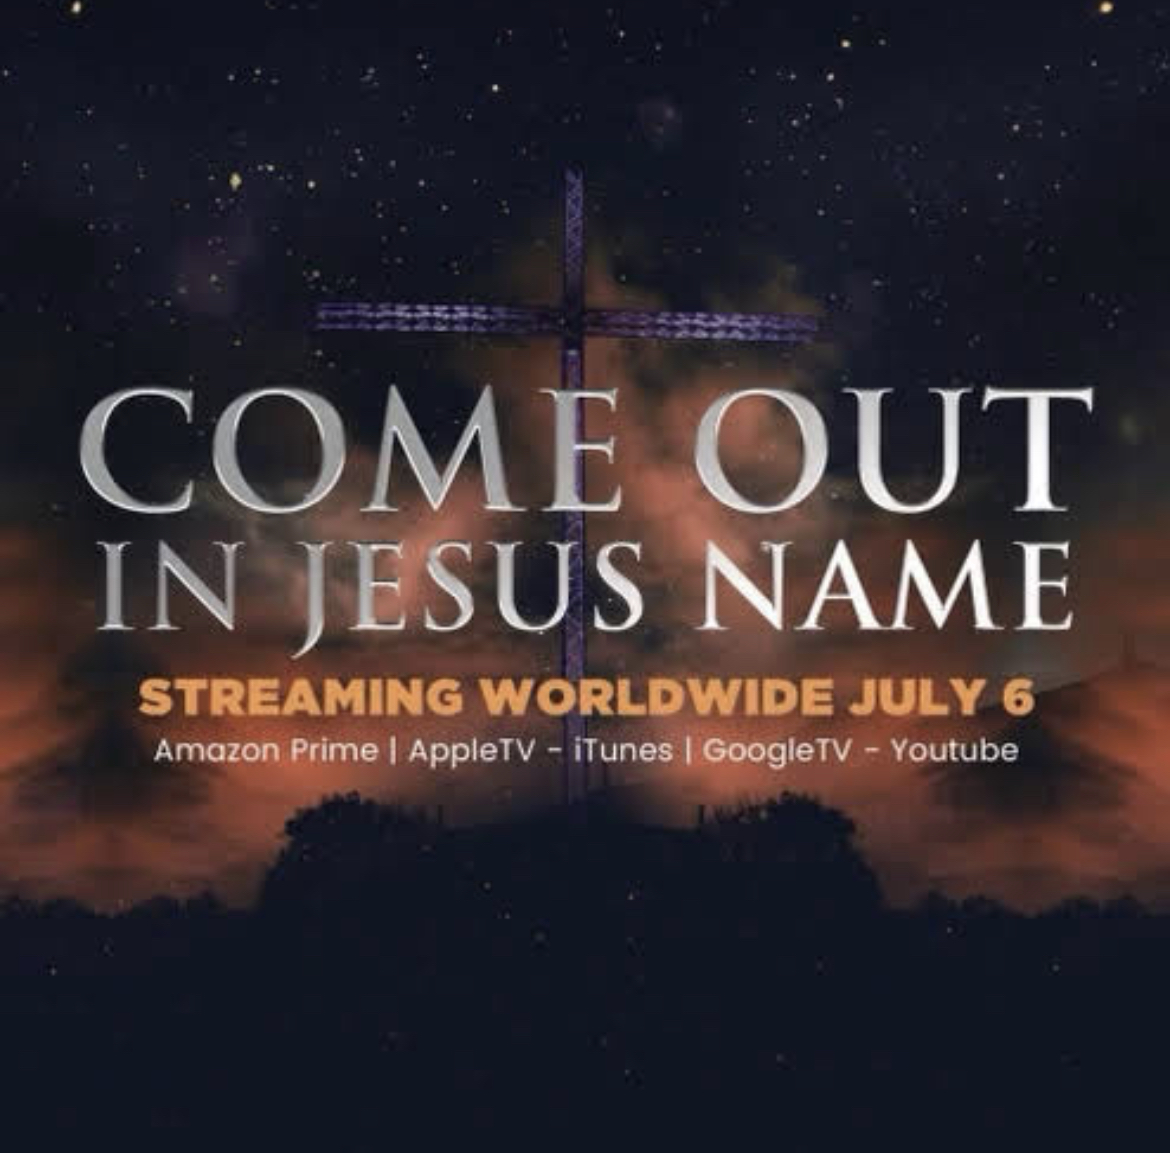 Come Out in Jesus Name Movie Free Online on July 6